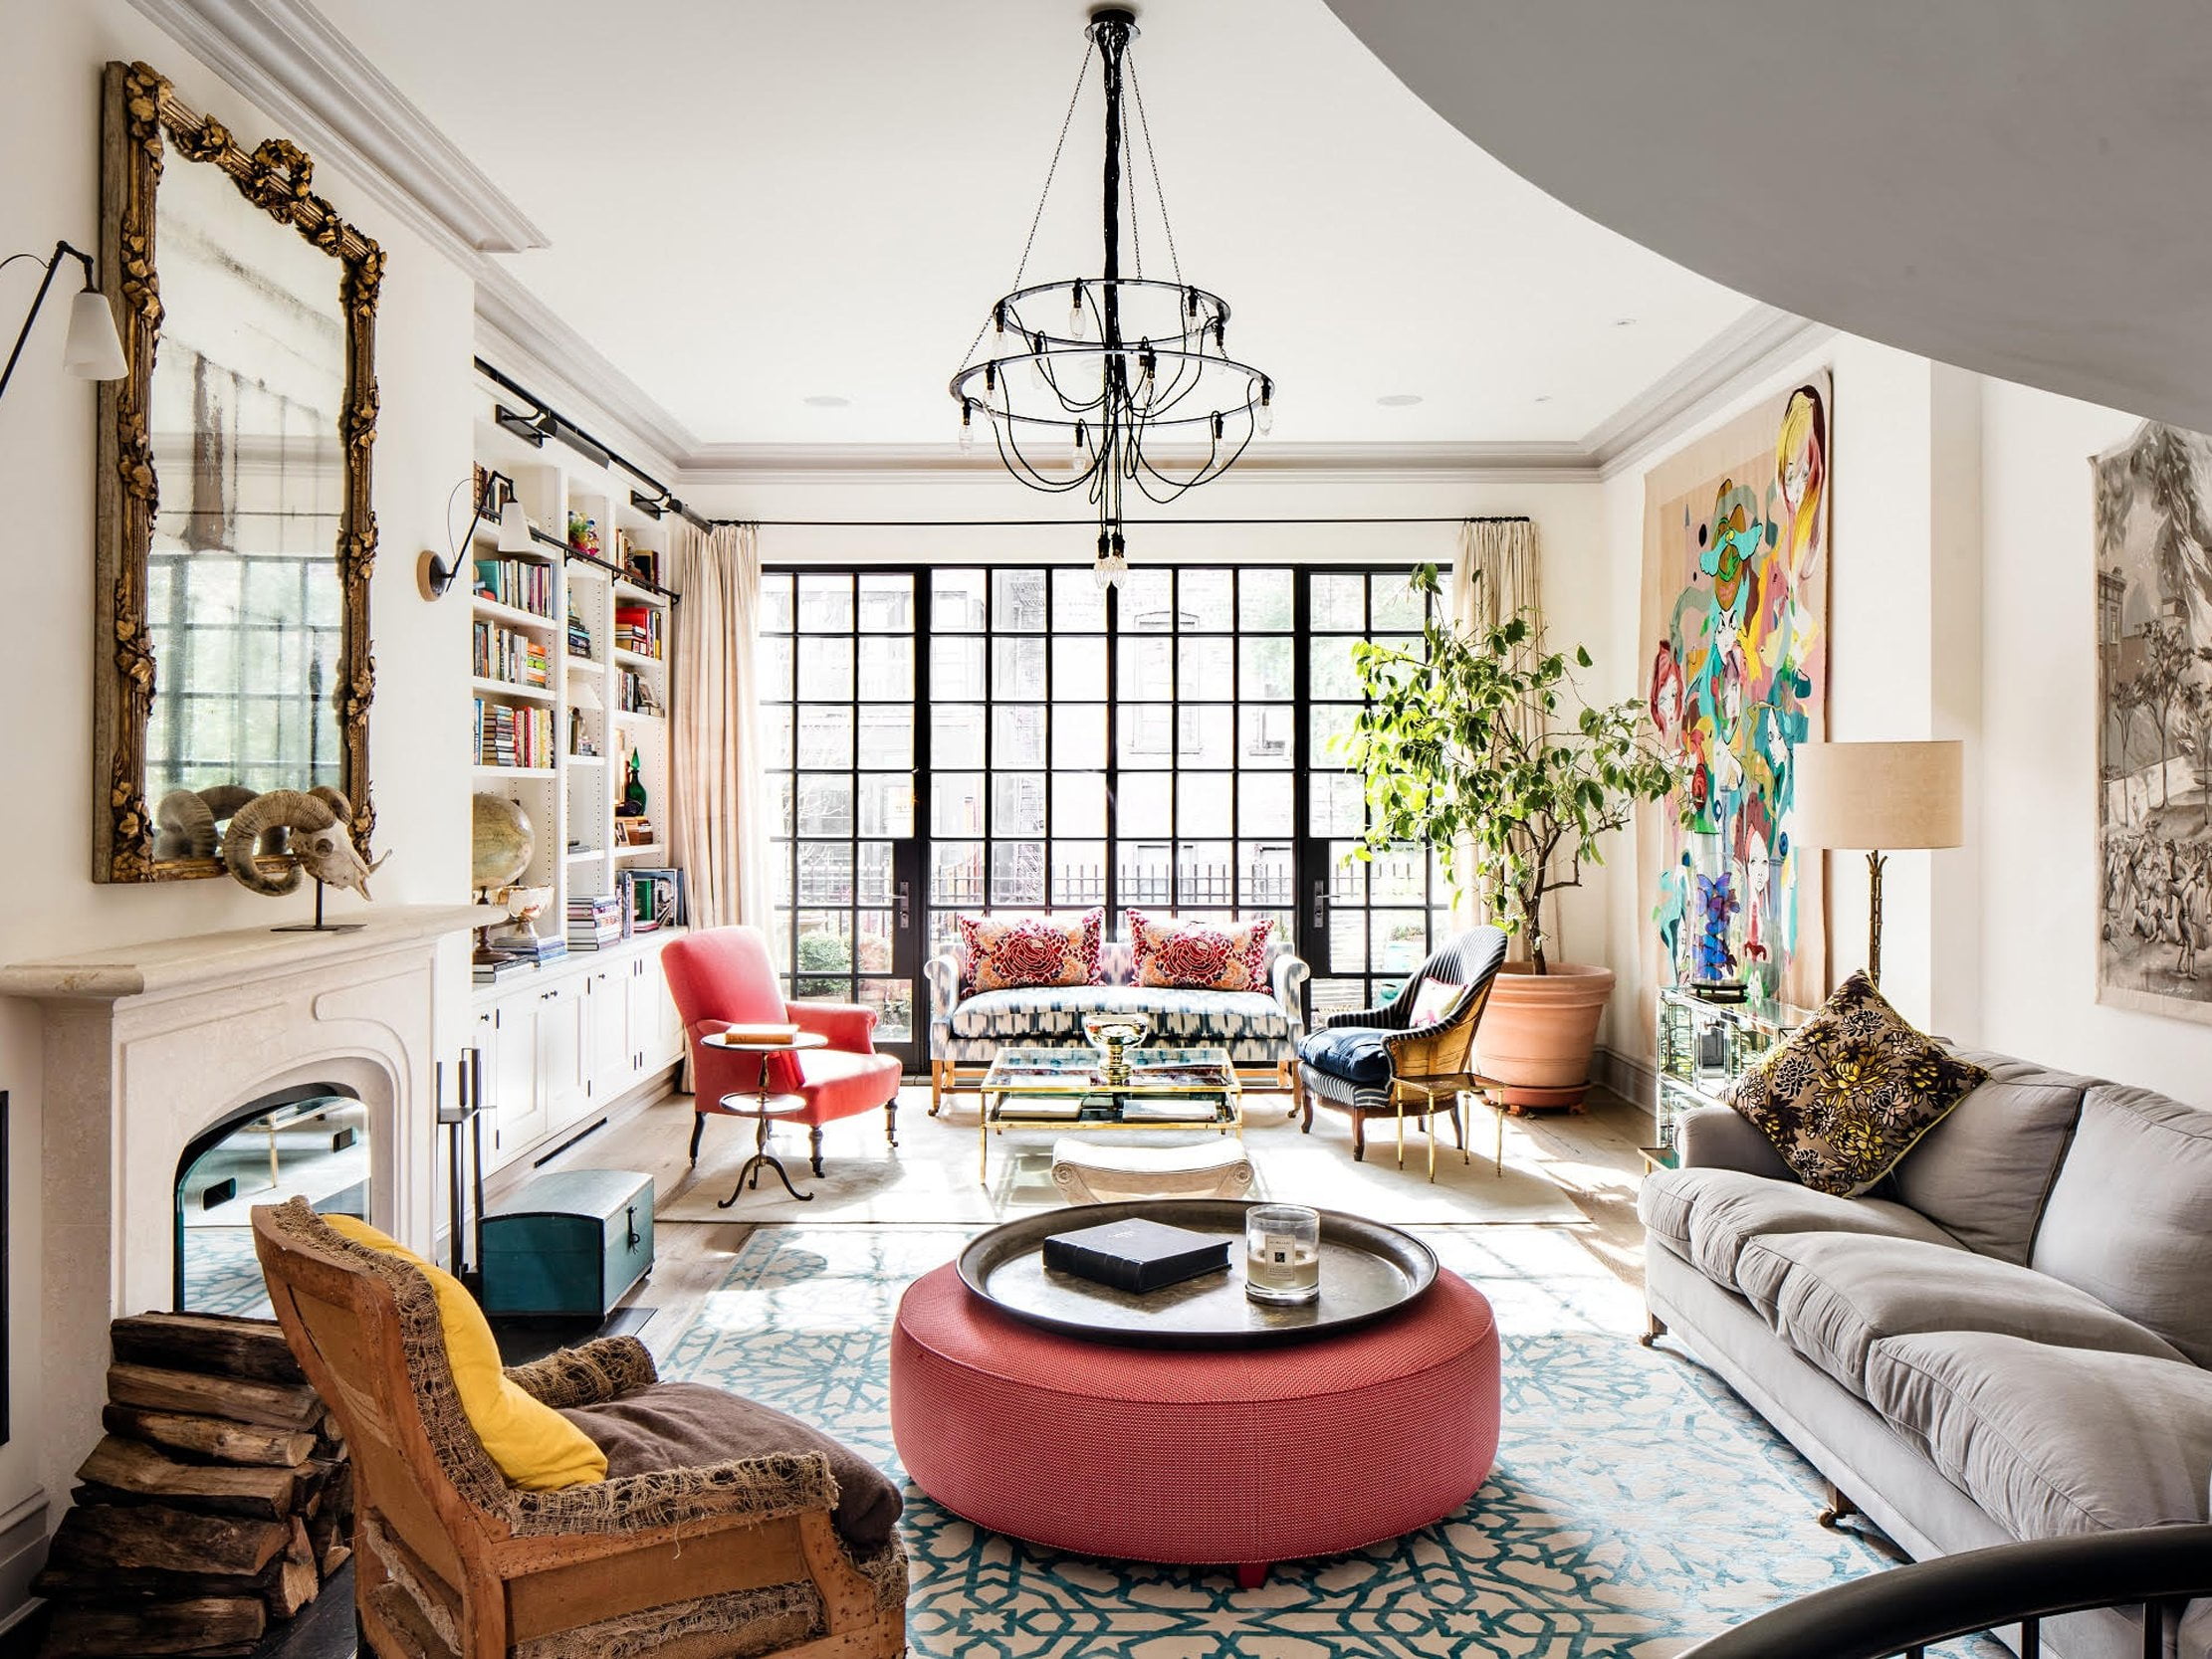 A British tech entrepreneur is selling his New York City townhouse for $26 million